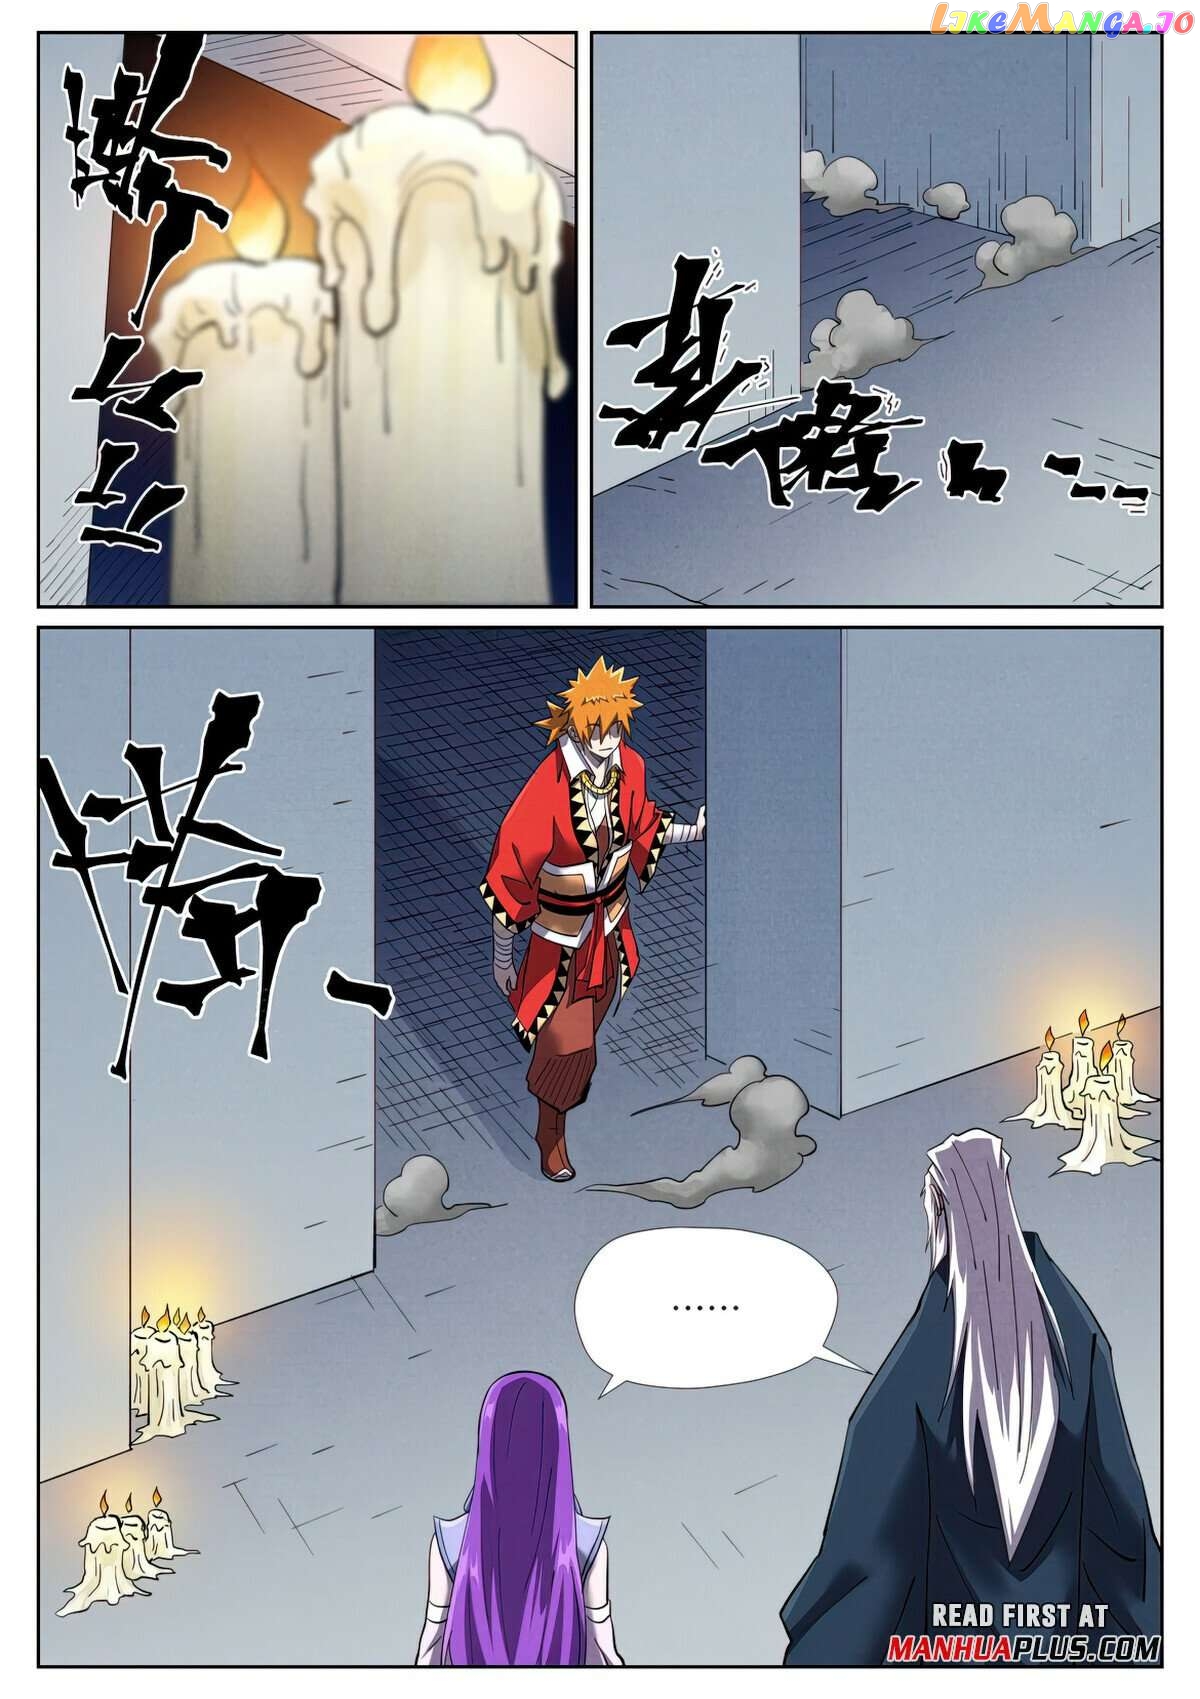 Tales of Demons and Gods Manhua Chapter 455.5 - Page 4